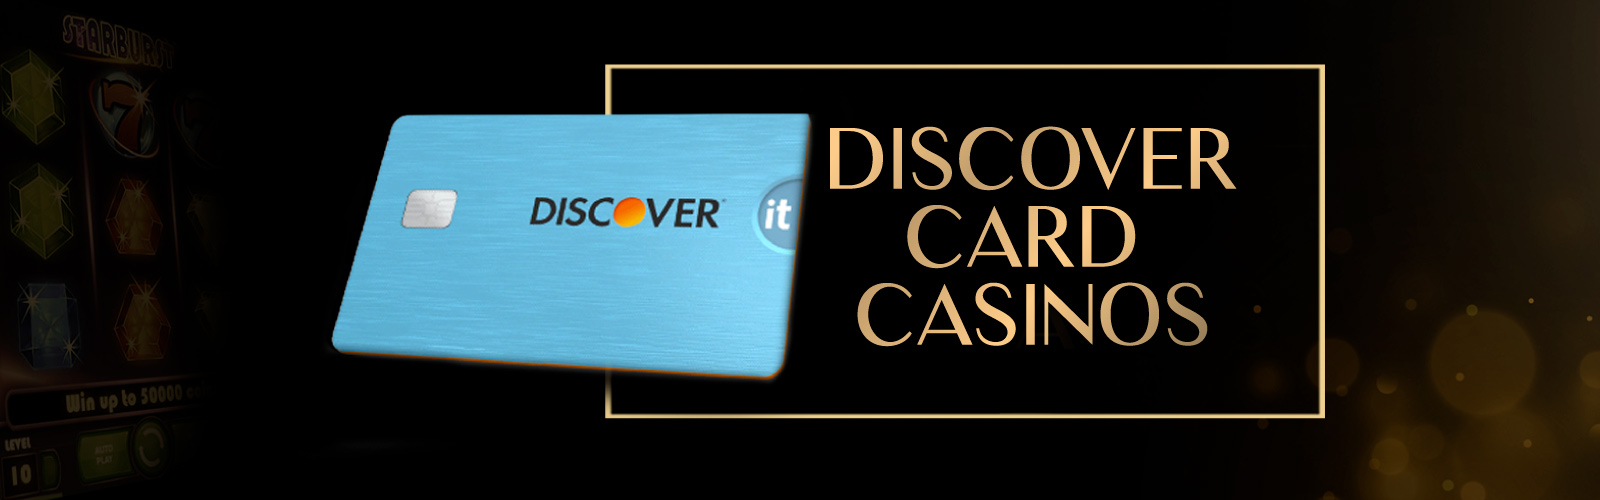 real cash online casinos accept discover